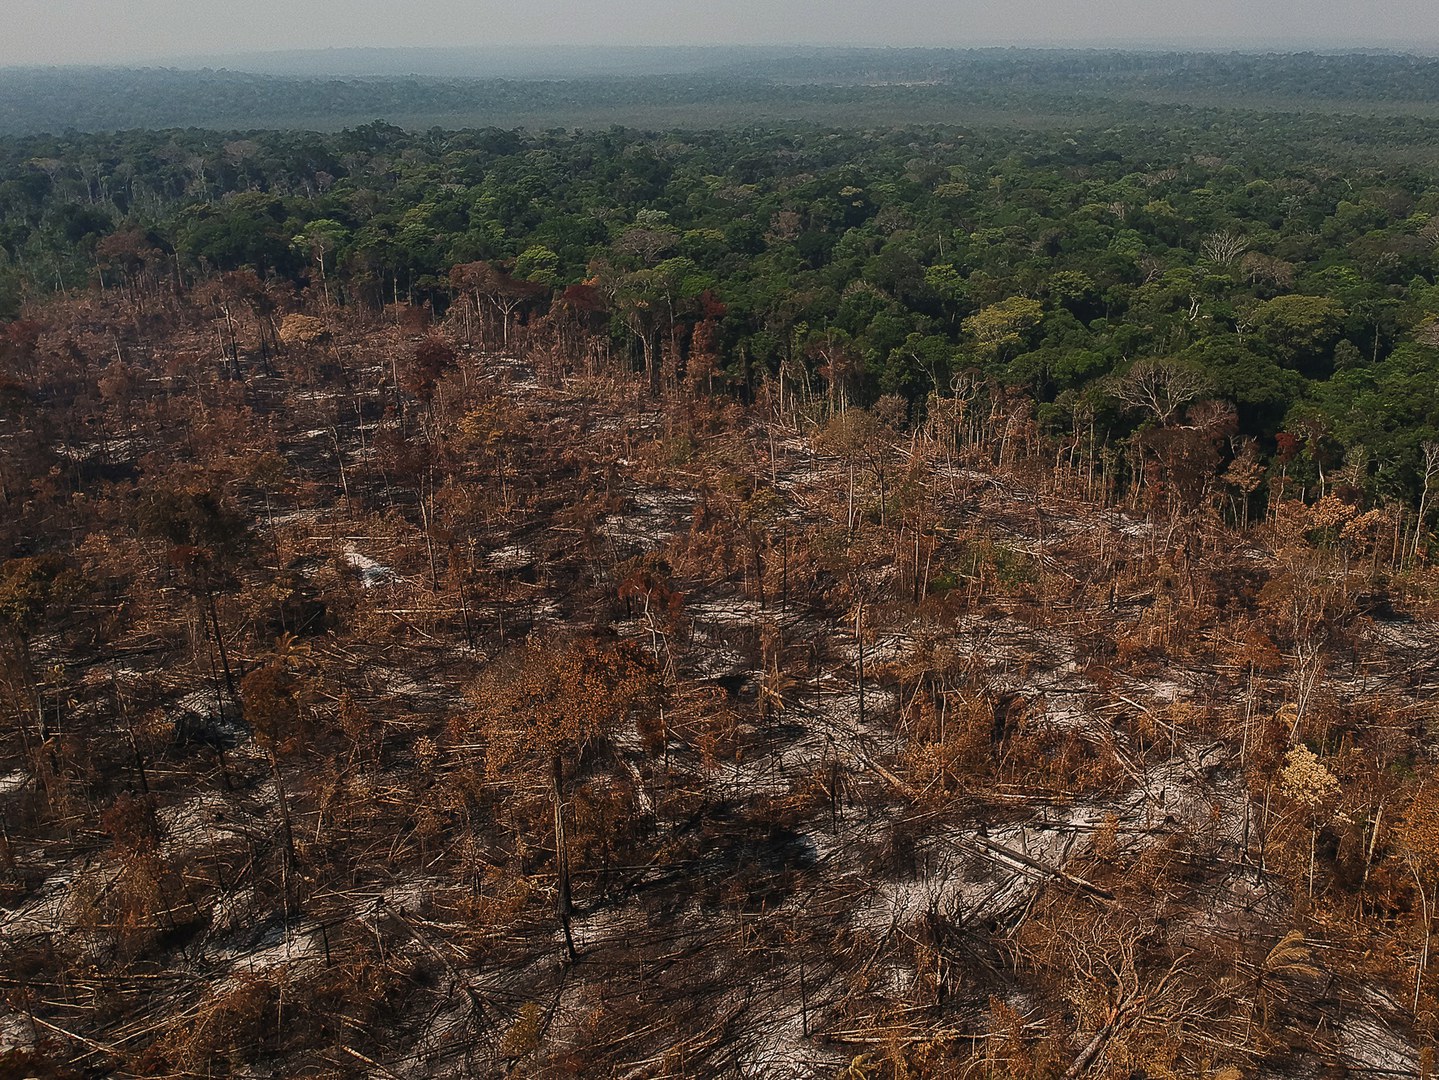 Tropical deforestation causes widespread loss of biodiversity and carbon stocks.